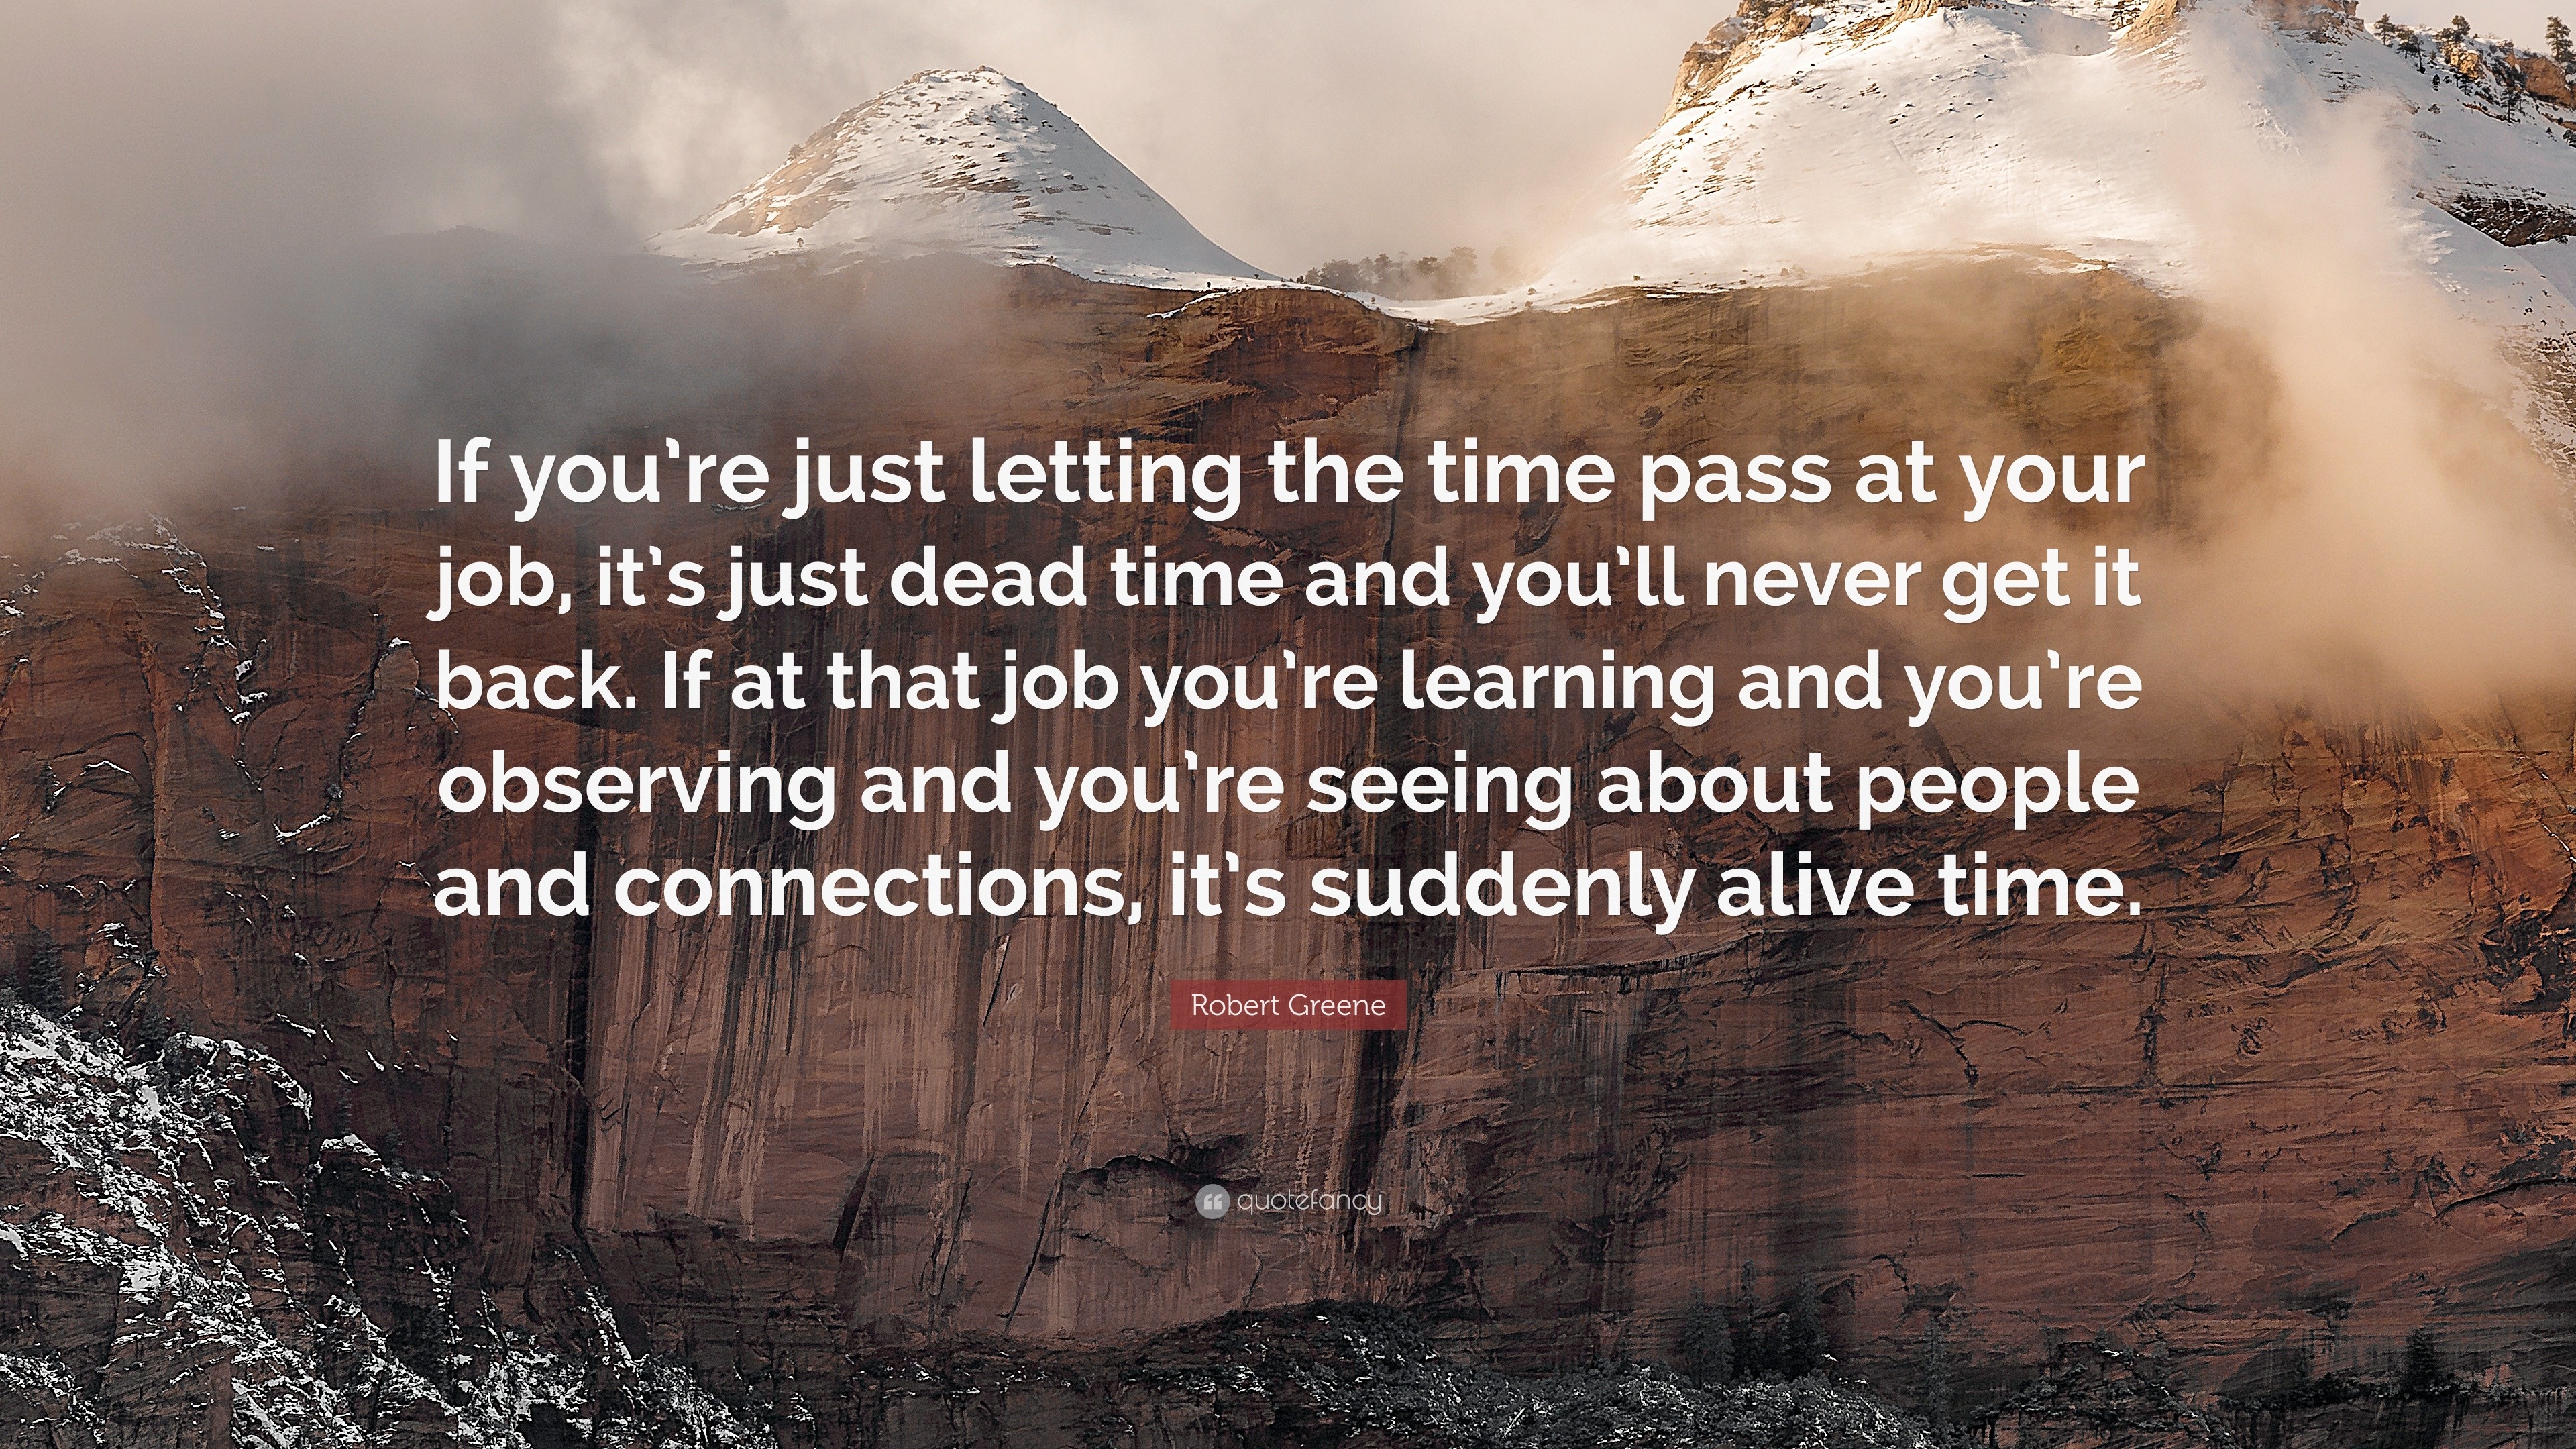 Robert Greene Quote “If you re just letting the time pass at your